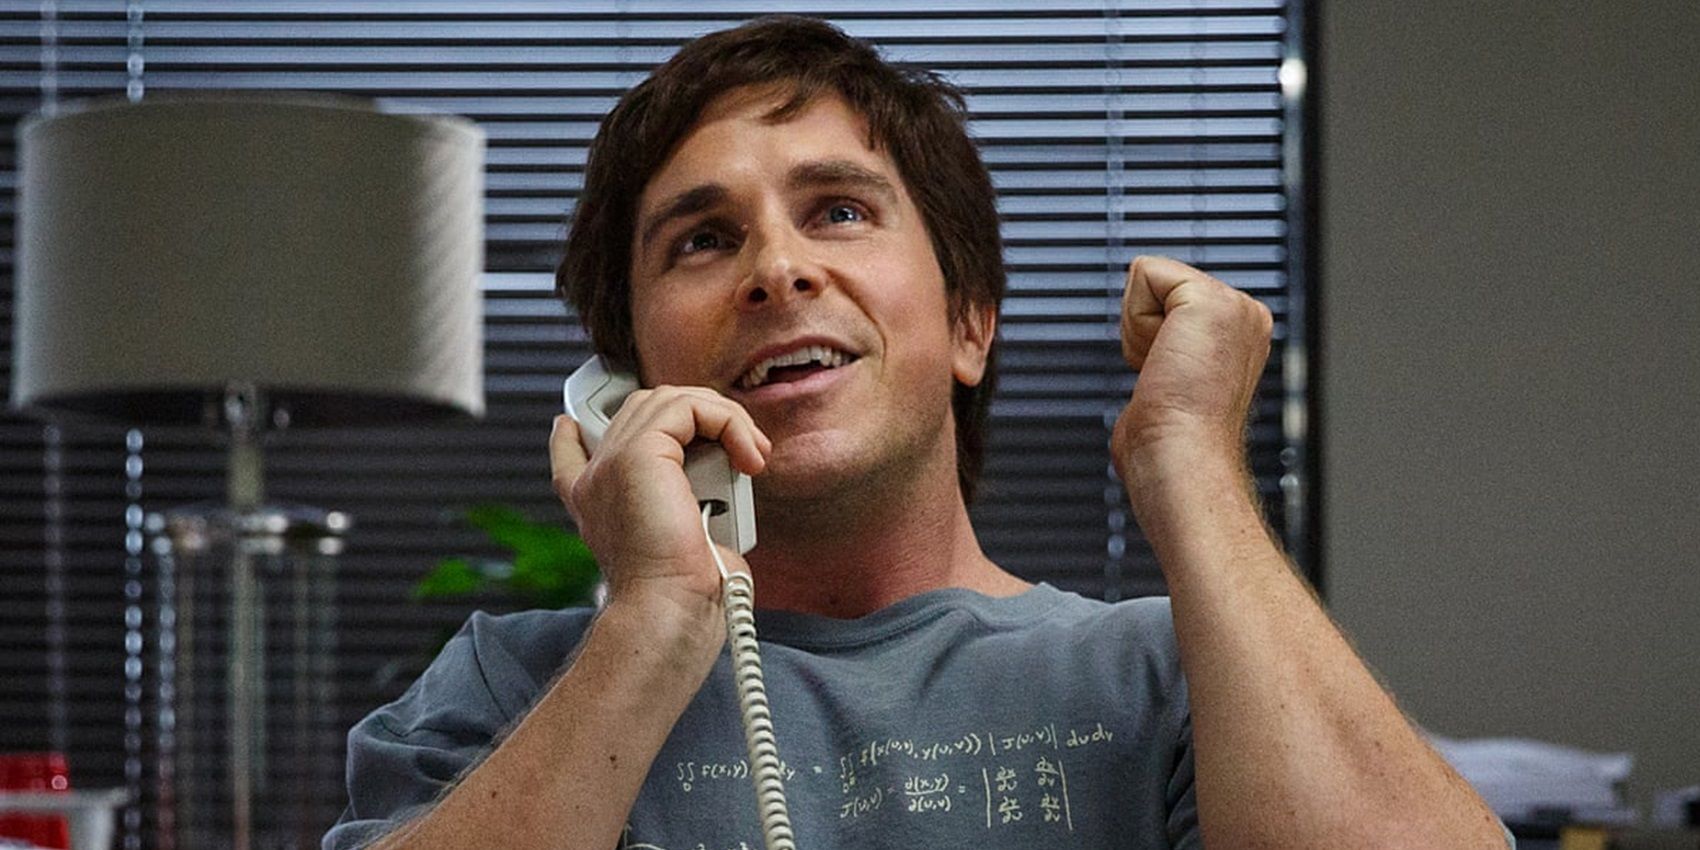 Christian Bale on the phone looking excited in The Big Short